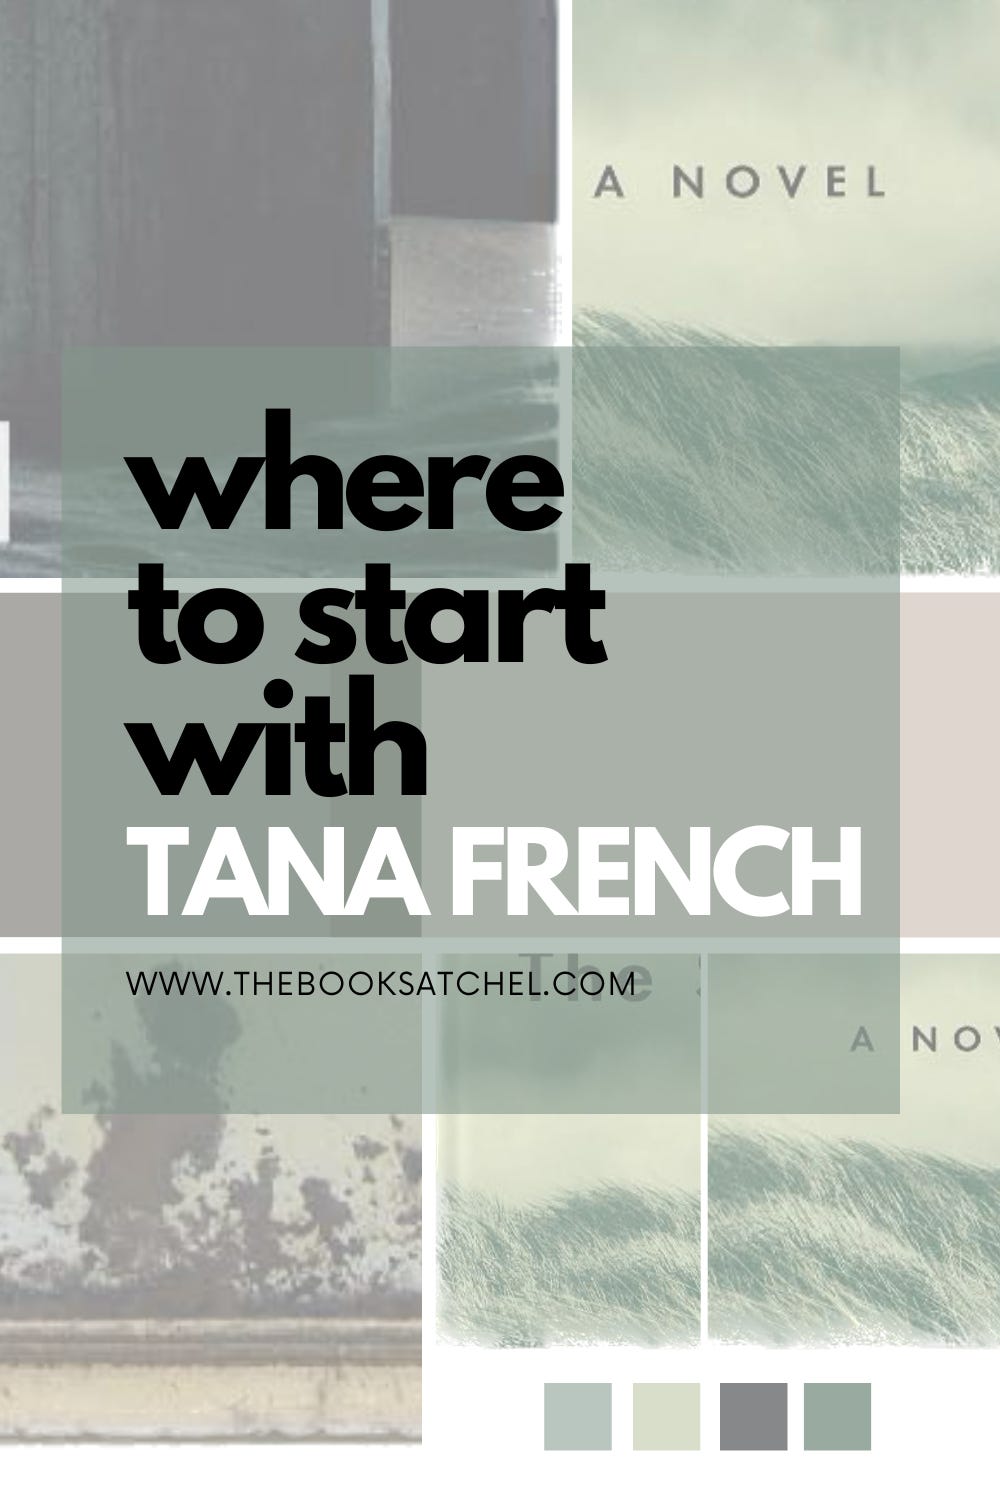 Book list : Where to start with Tana French